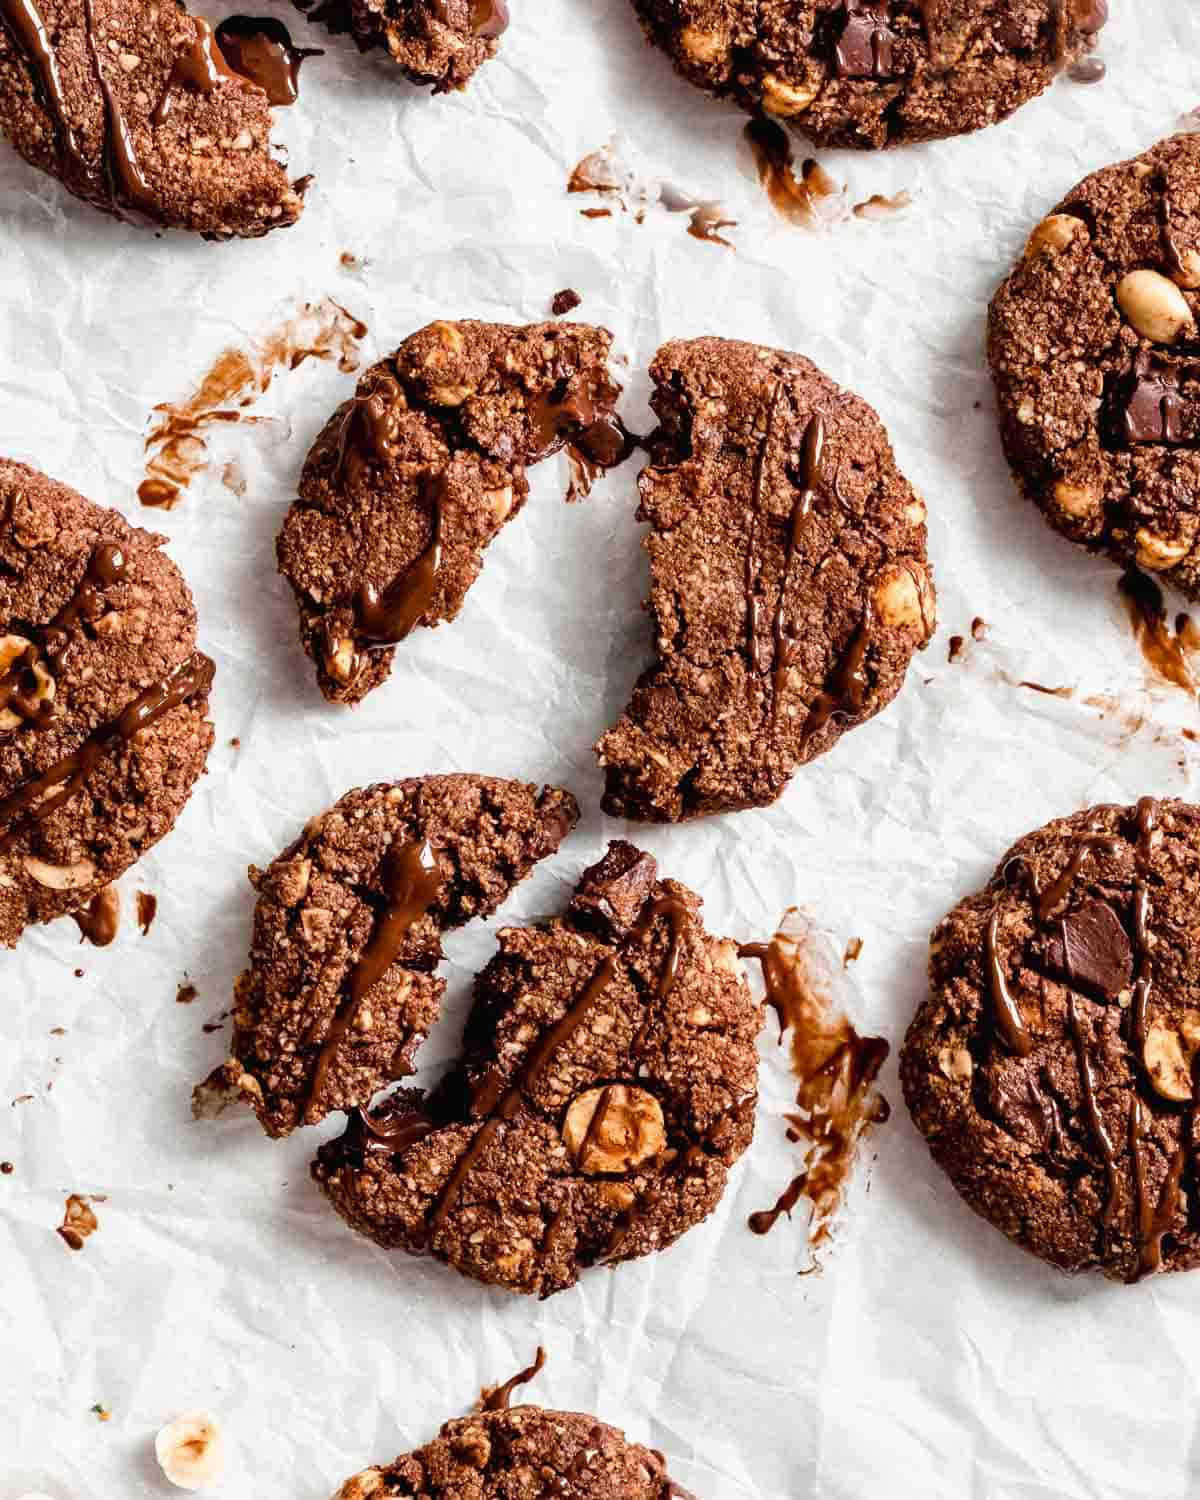 8 chocolate cookies on a cookie sheet lined with parchment paper.